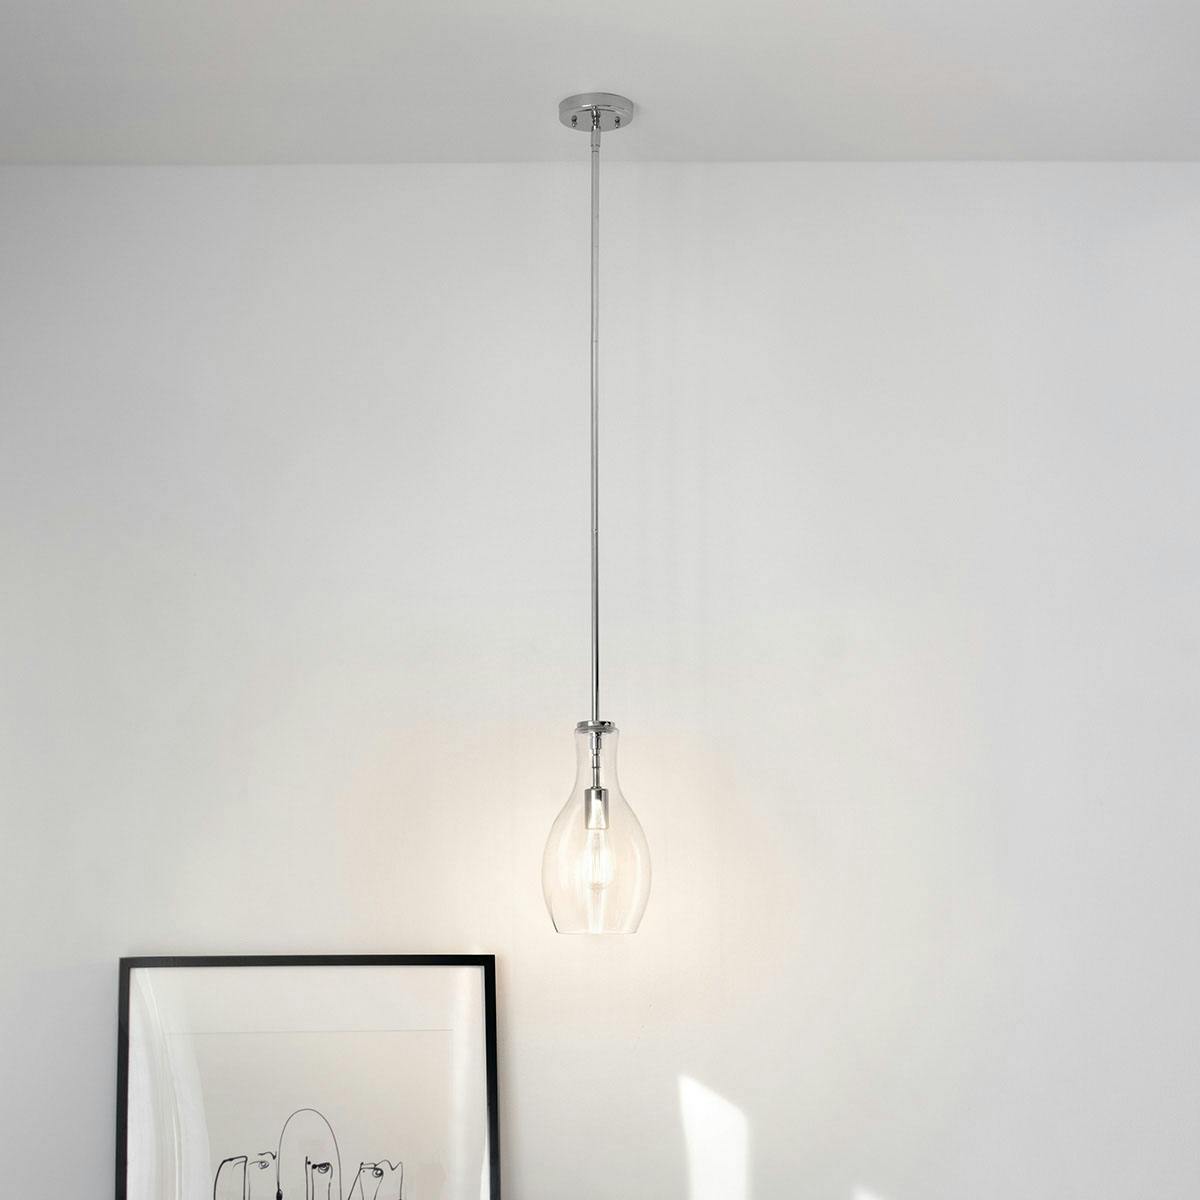 Day time Hallway image featuring Everly pendant 42456CHCLR